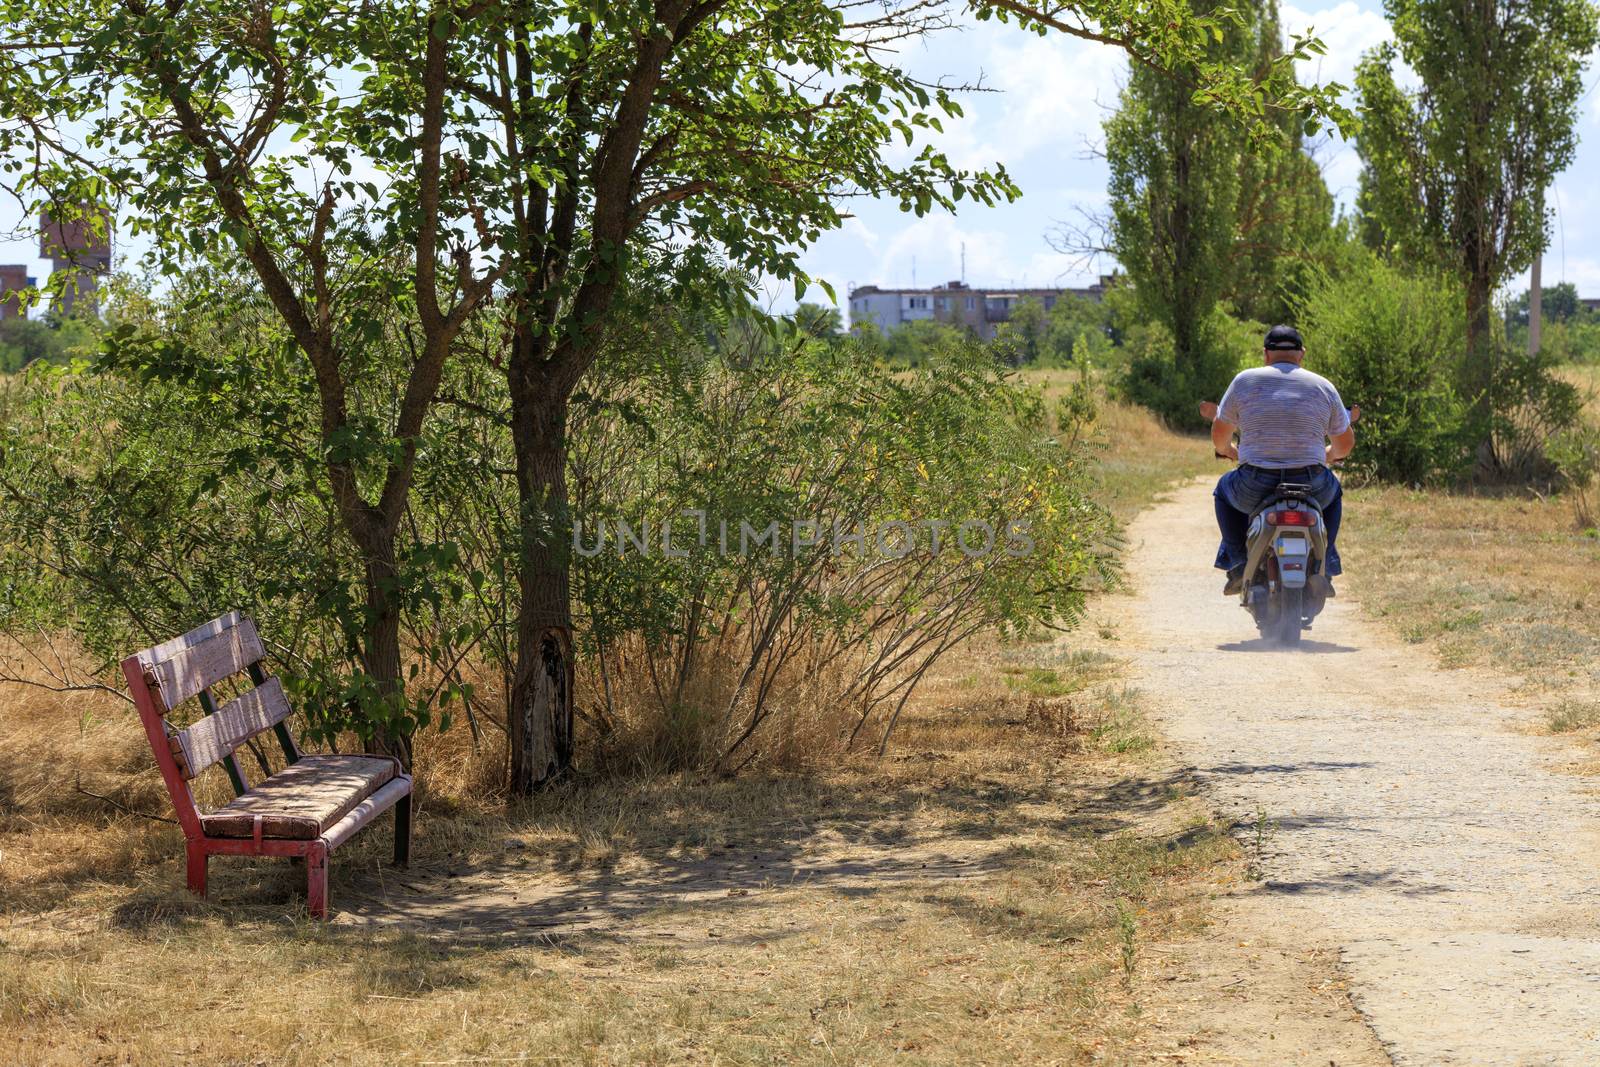 A bench in the shade of a tree, old and weathered, against the backdrop of a rural landscape and a resident who is riding a scooter along an old concrete path.